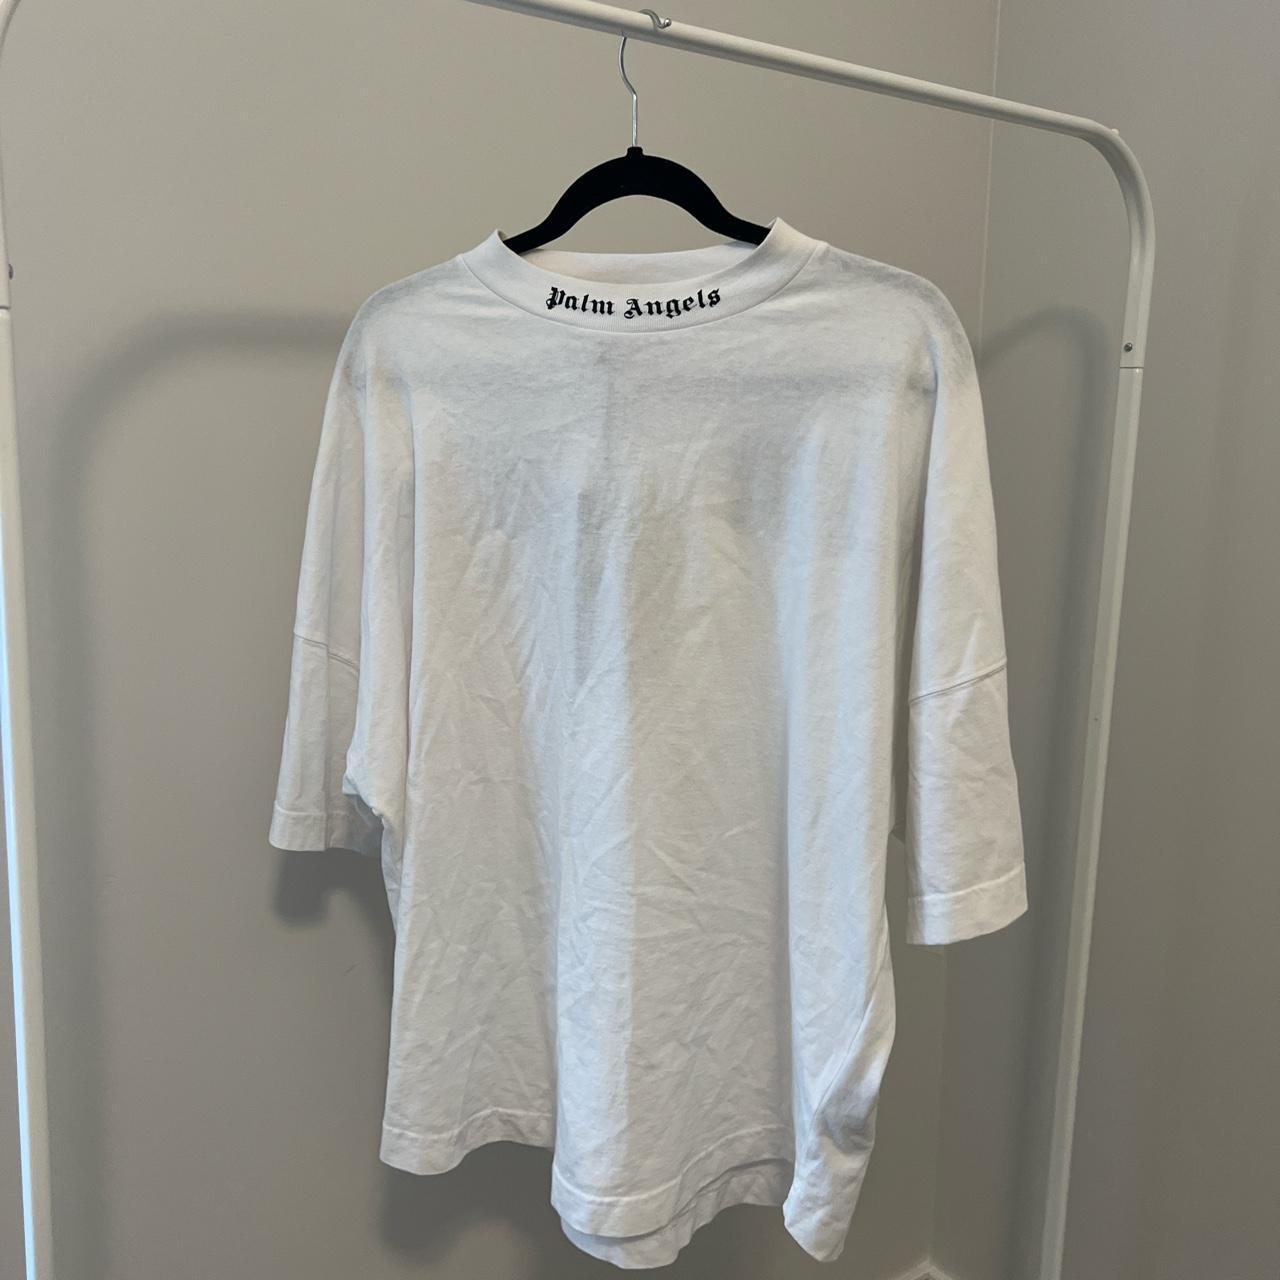 Palm Angels Women's White and Black Shirt (4)